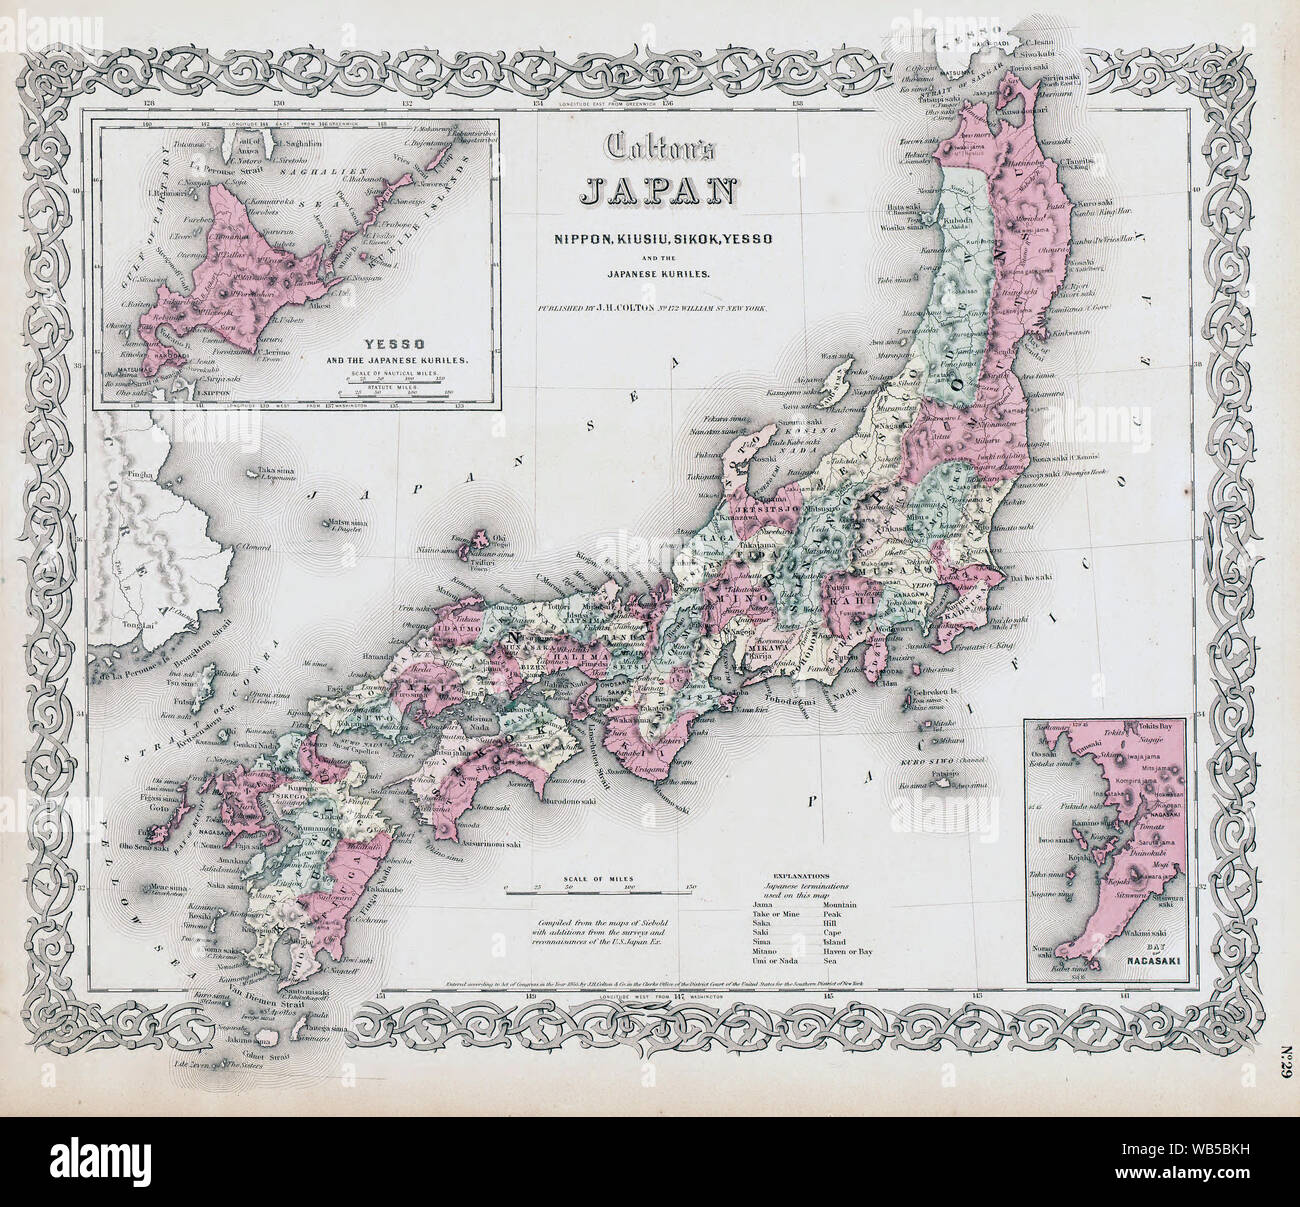 [ 1850s Japan - Map of Japan, 1855 ] —   Map of Japan by G. Woolworth Colton dating from 1855. 'Nippon, Kiusiu, Sikok, Yesso and the Japanese Kuriles.' Insets: 'Yesso and the Japanese Koriles--Bay of Nagasaki.' Original at scale ca. 1:4,118,000, 29 x 36 cm.  19th century vintage map. Stock Photo